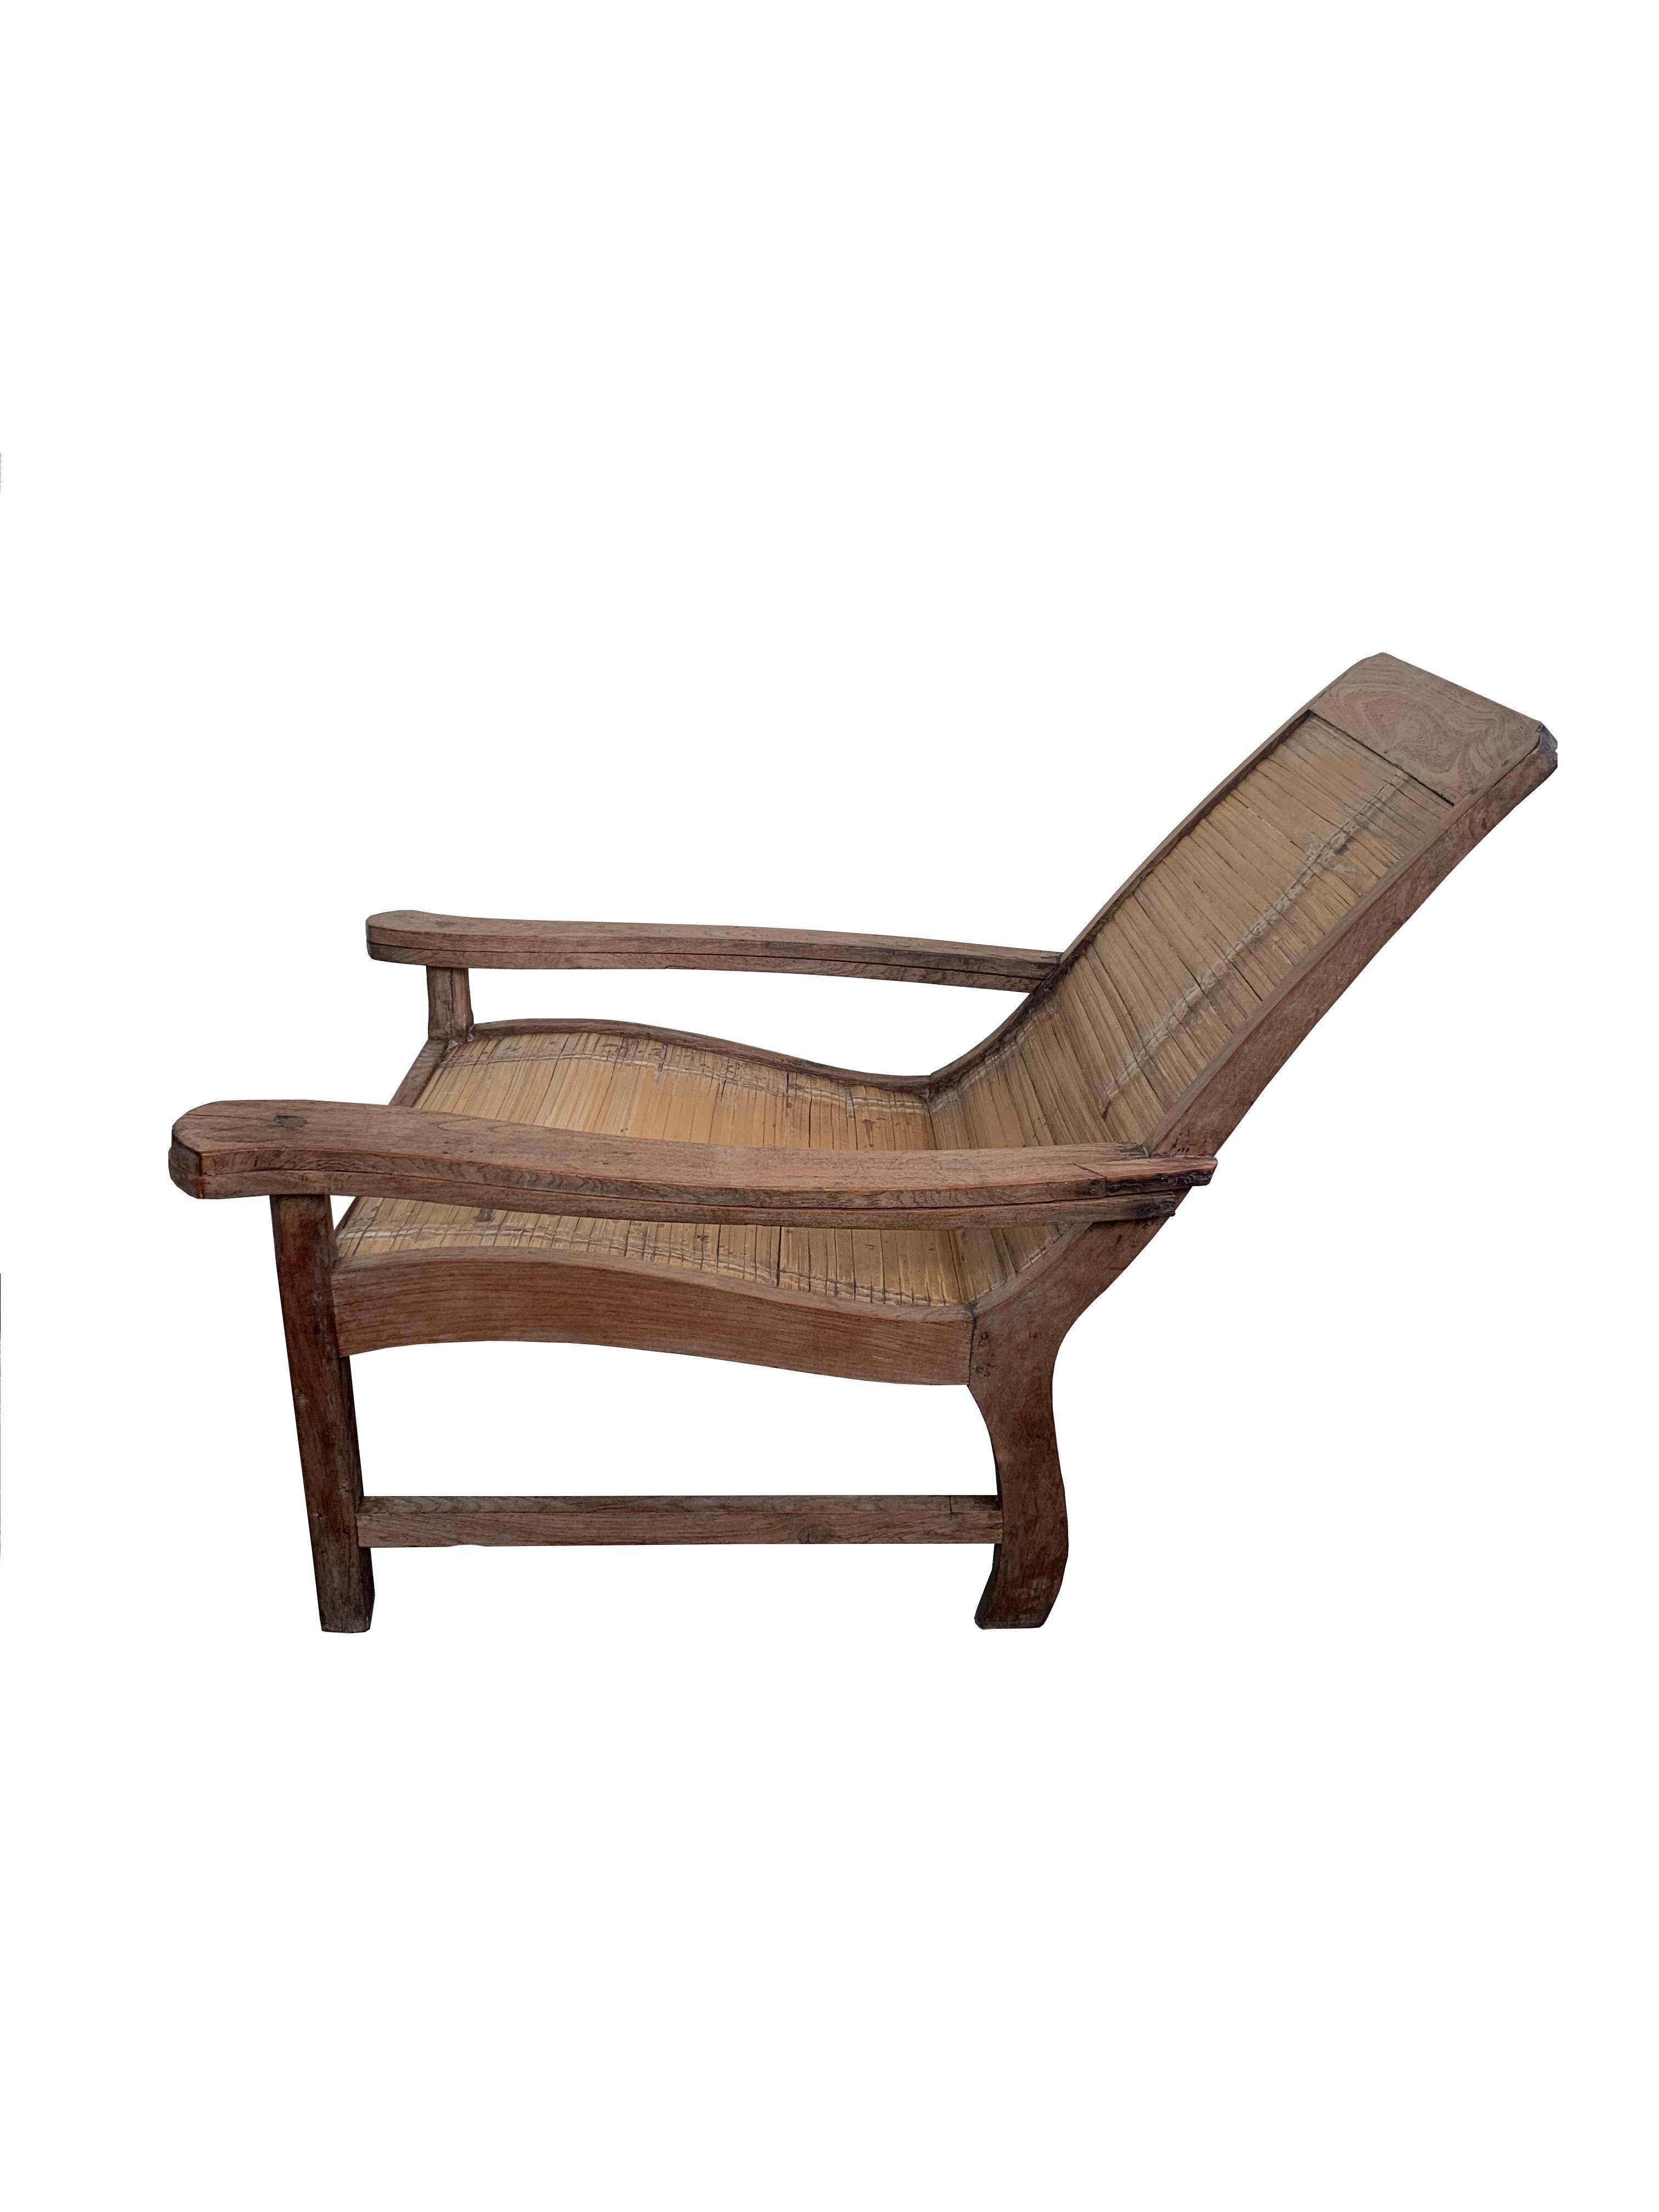 Indonesian Colonial Solid Teak & Bamboo Plantation Chair with Leg Rests, Java, Indonesia